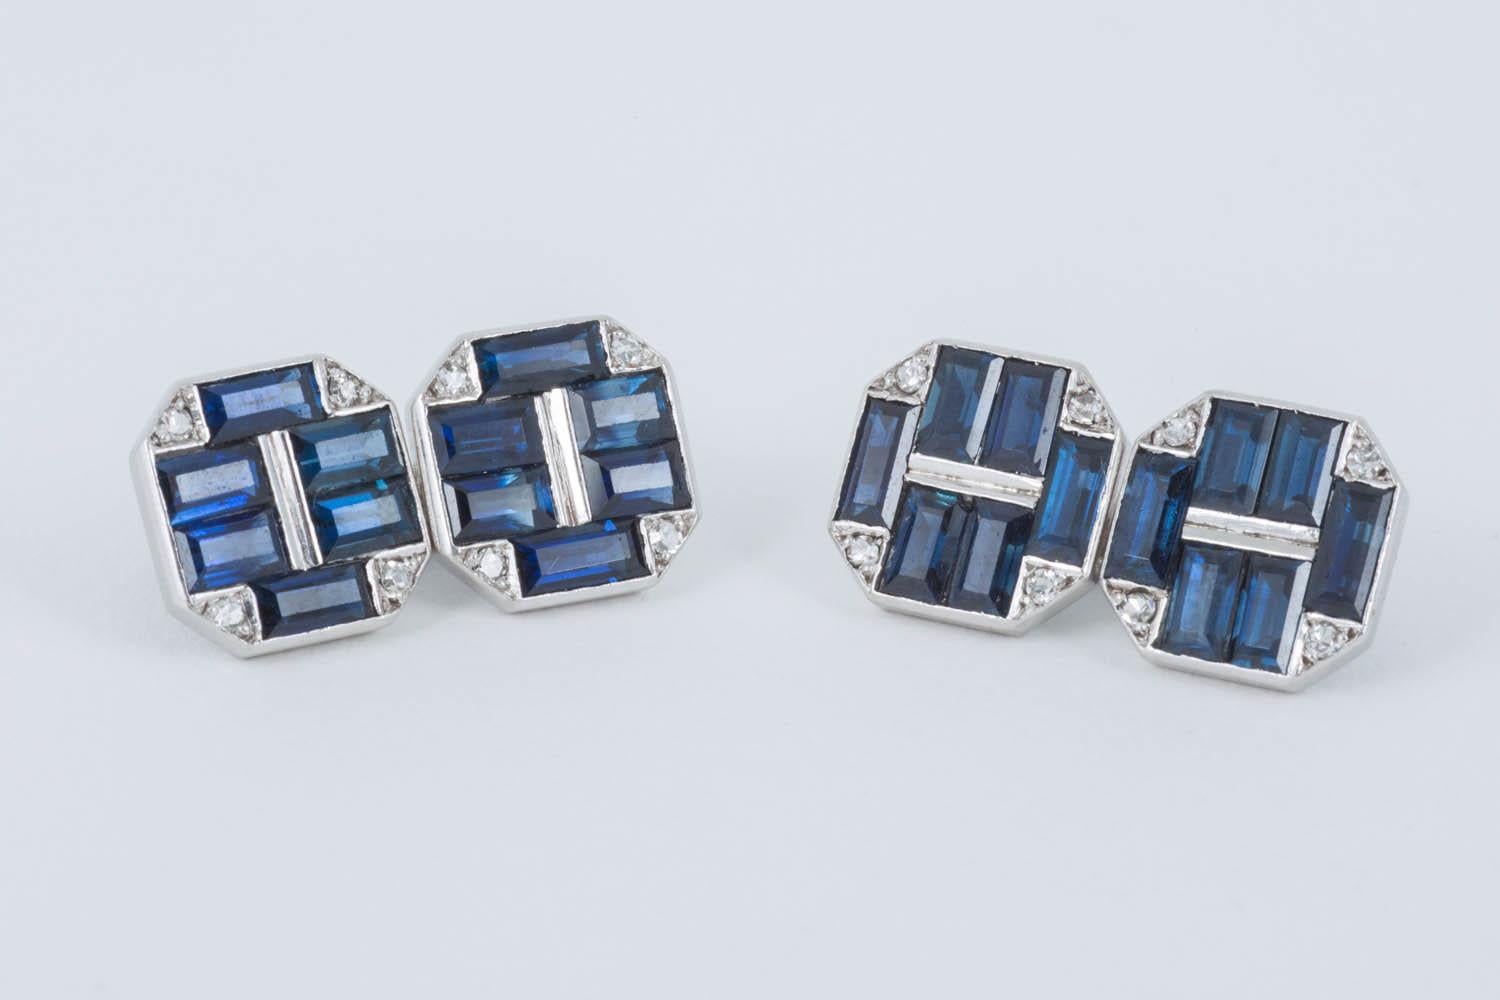 Pair of cut cornered square shaped Cufflinks by Cartier with two matching studs,set with six ,baguette cut sapphires,and four,brilliant cut diamonds,mounted in white gold and in original case.C 1930